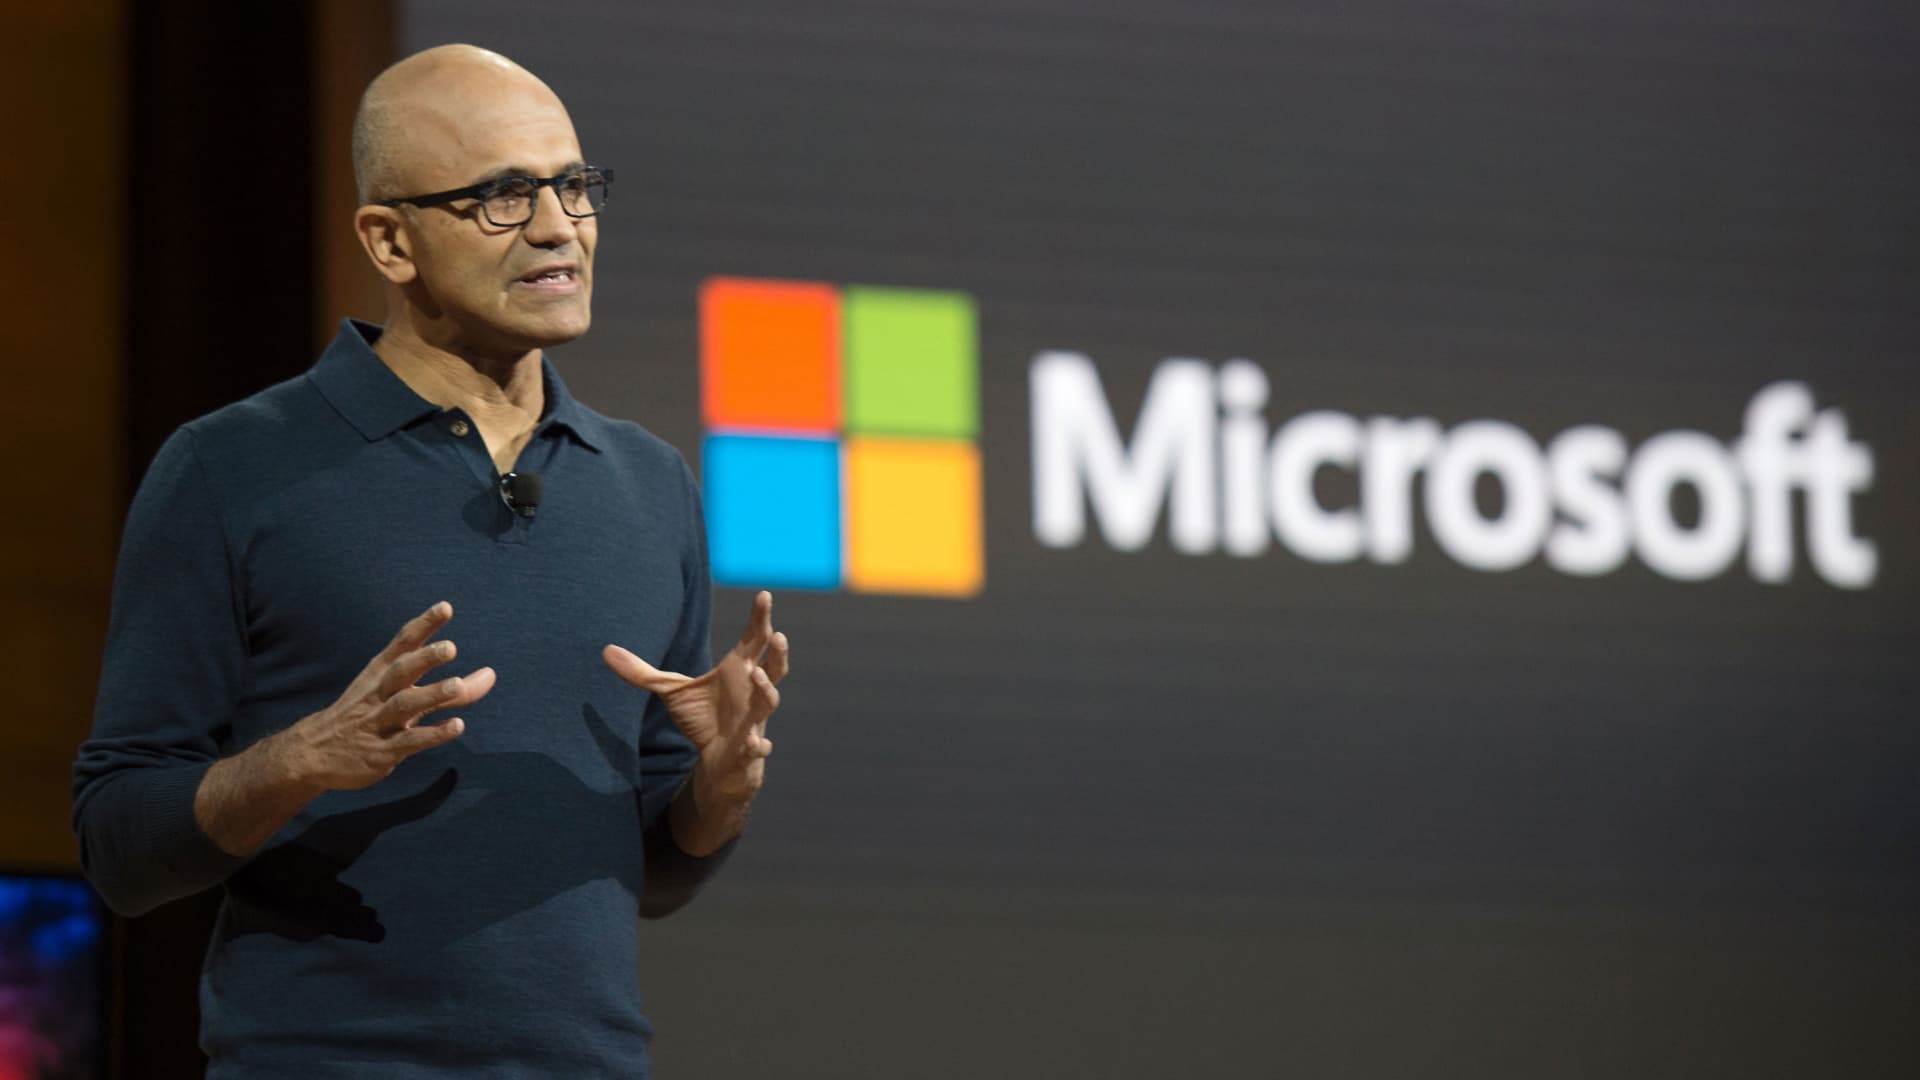 Microsoft misses on top and bottom lines